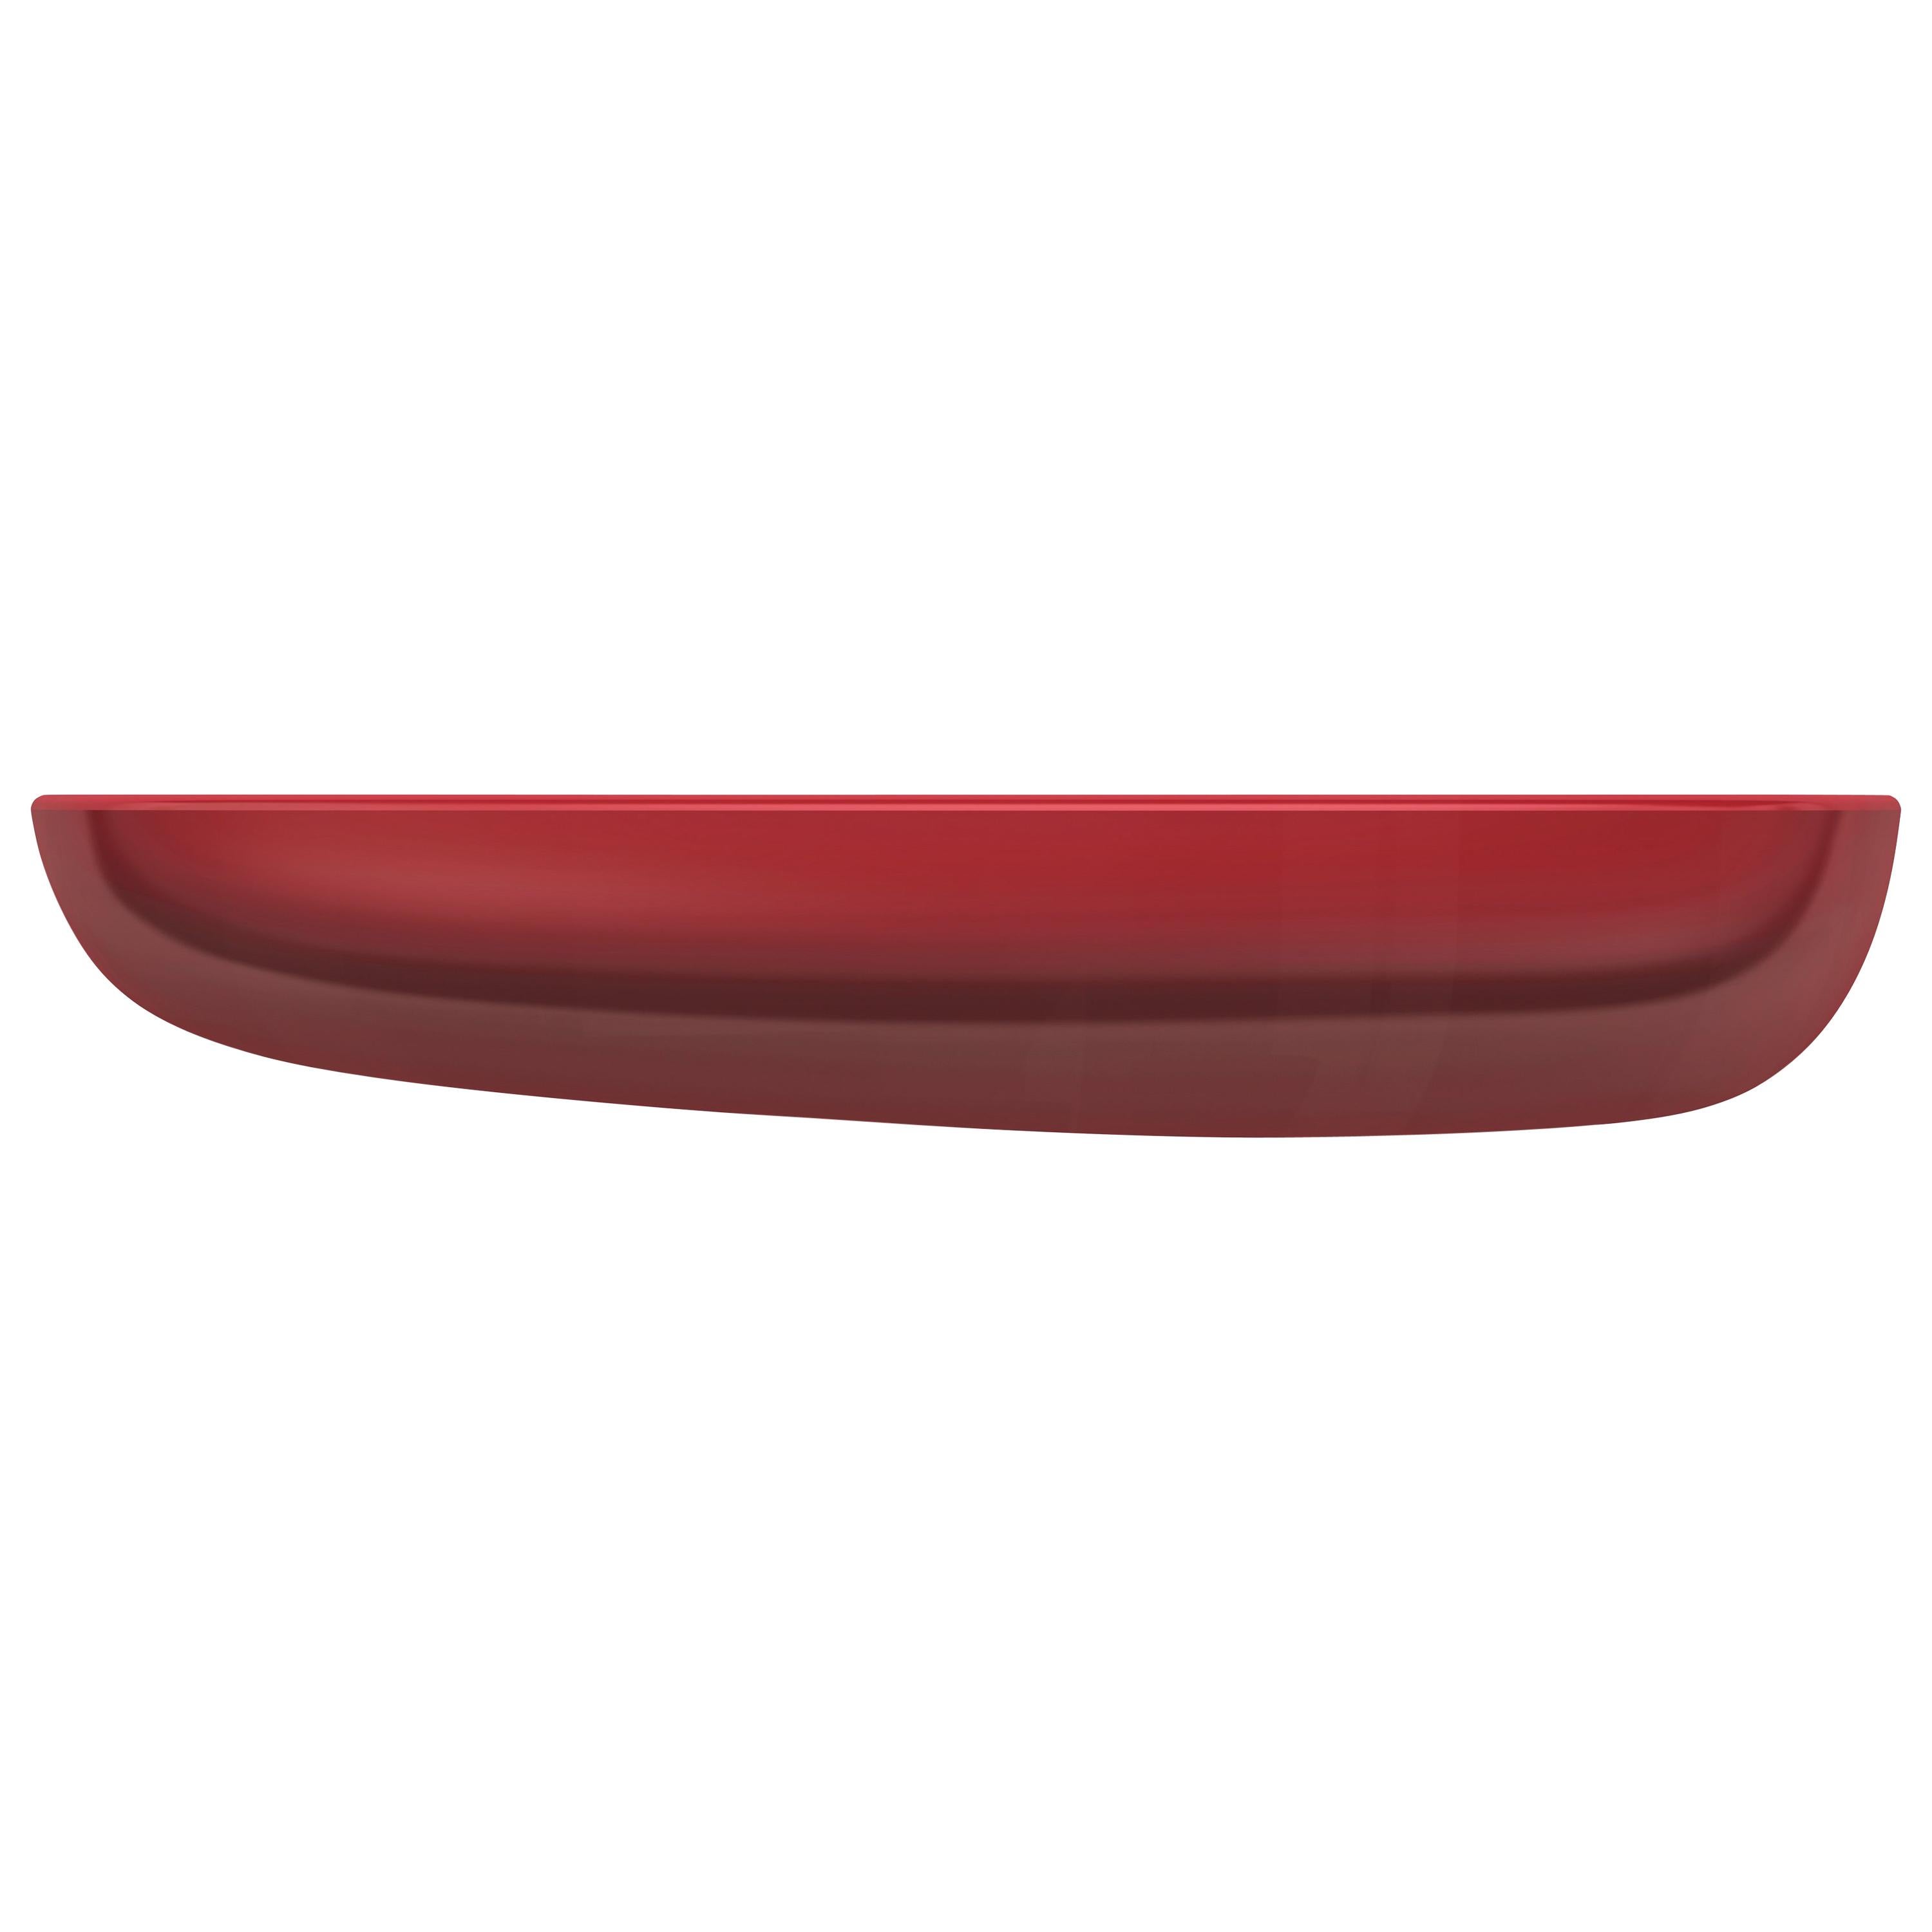 Vitra Large Corniches in Japanese Red by Ronan & Erwan Bouroullec For Sale